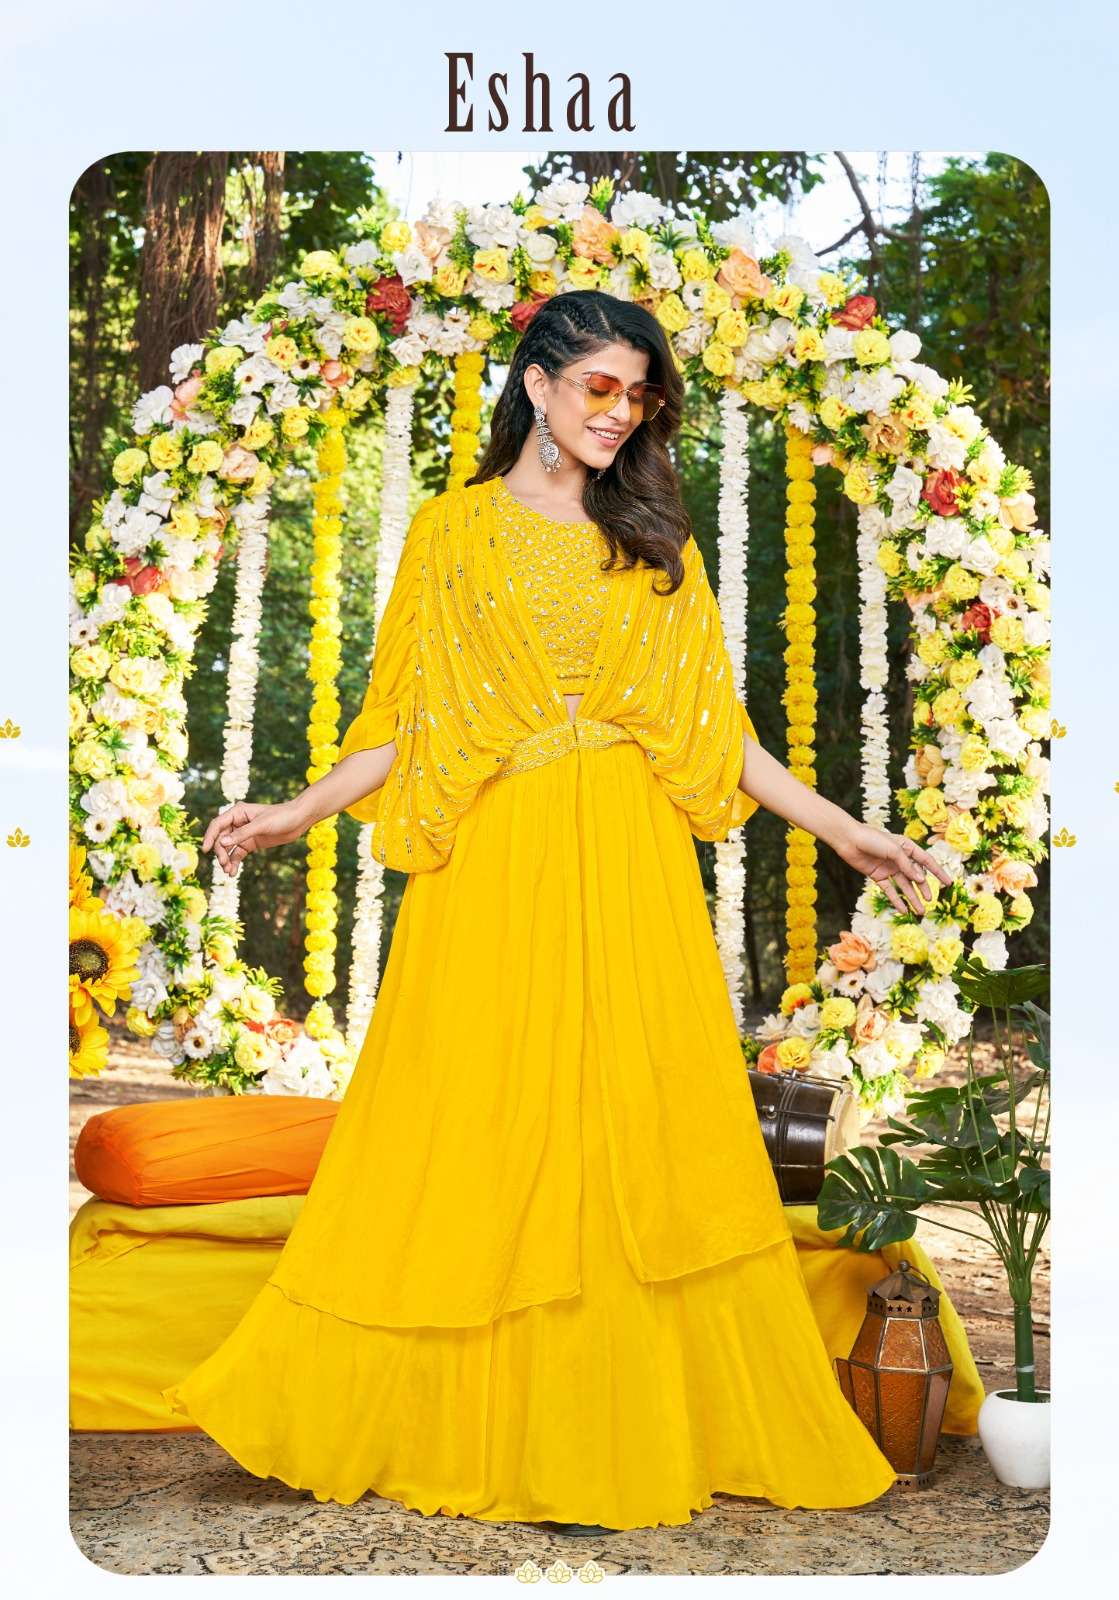 Haldi Function Dress Yellow Outfit for Women